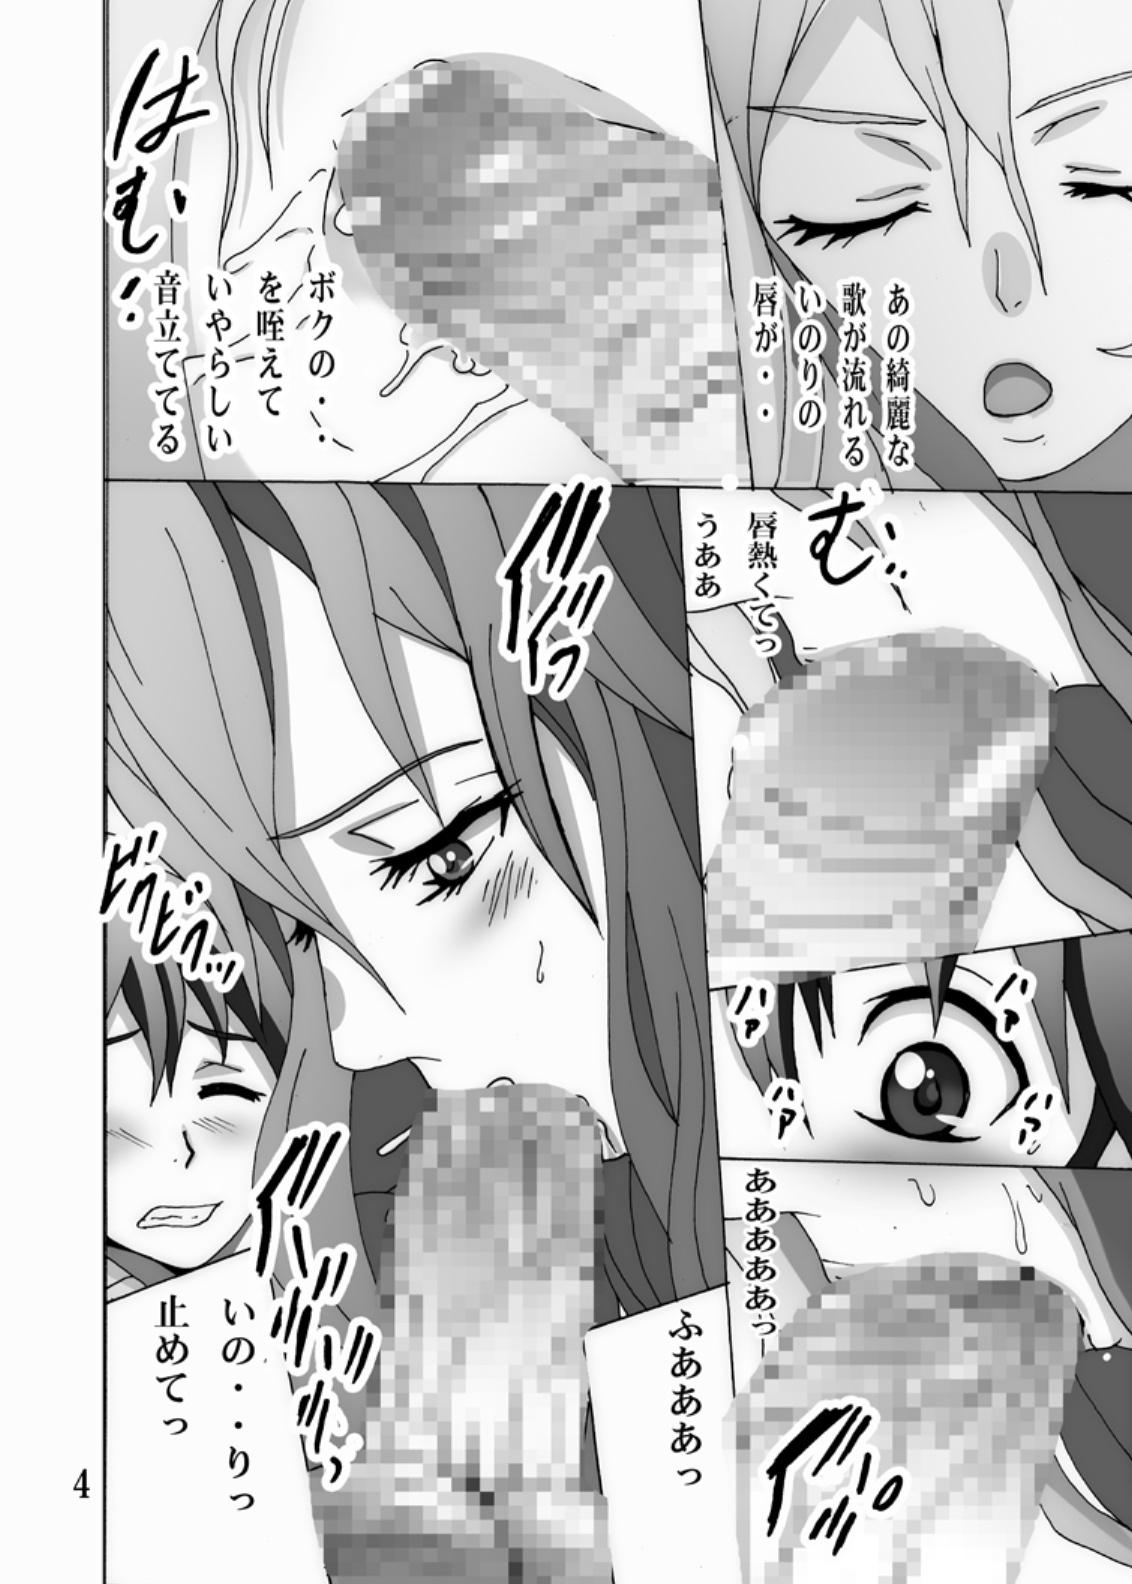 Blowjob tawamure - Guilty crown Ikillitts - Page 3